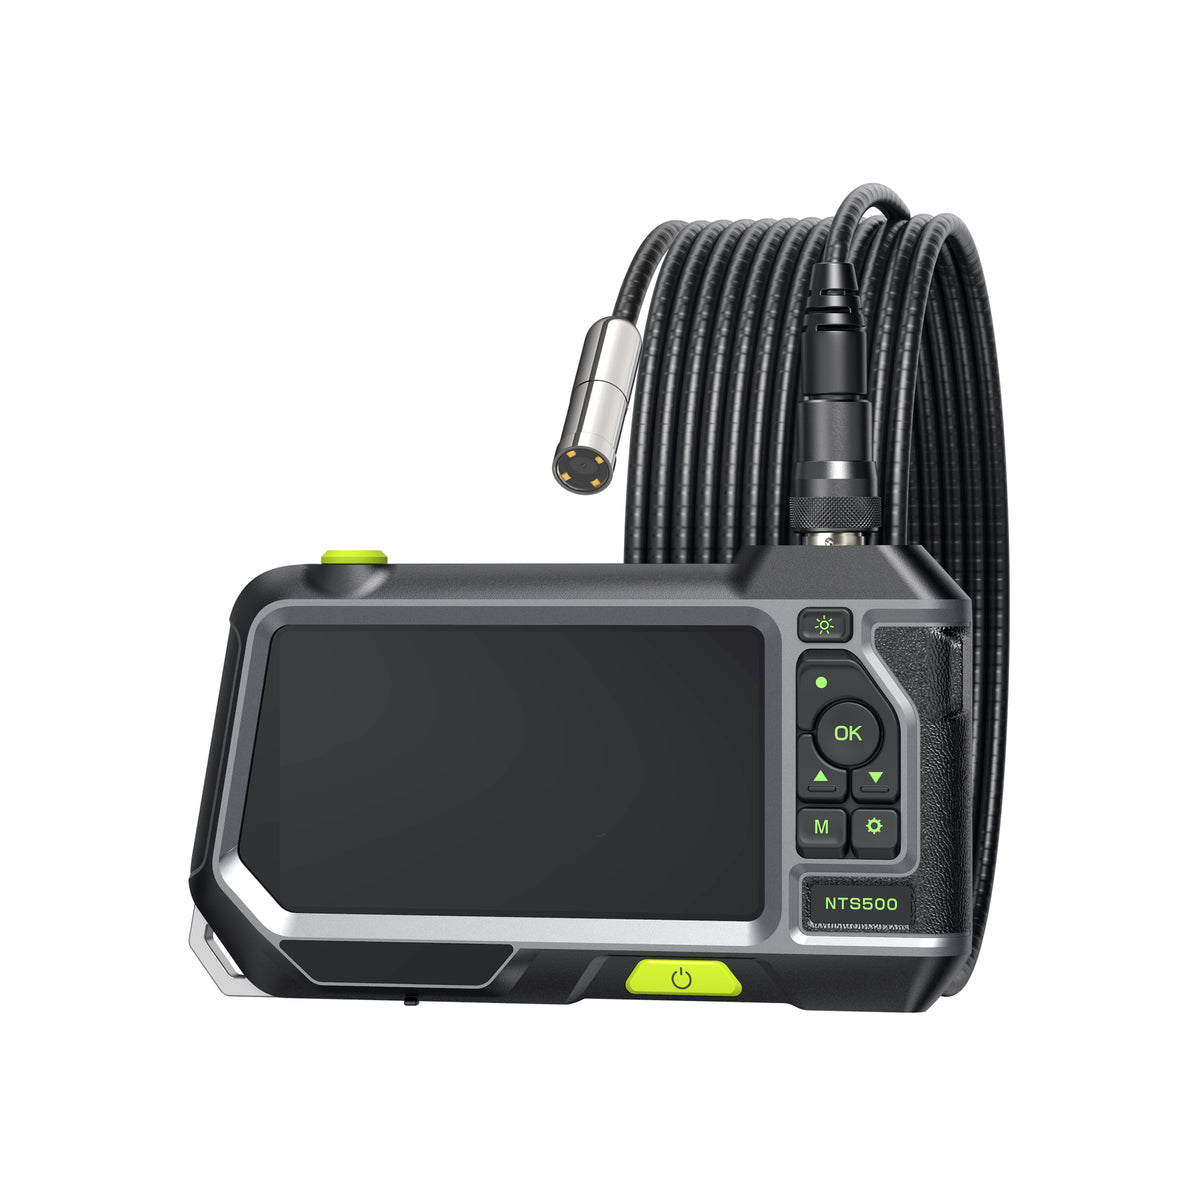 Teslong TD500 Articulating Endoscope Inspection Camera with 5-Inch Screen